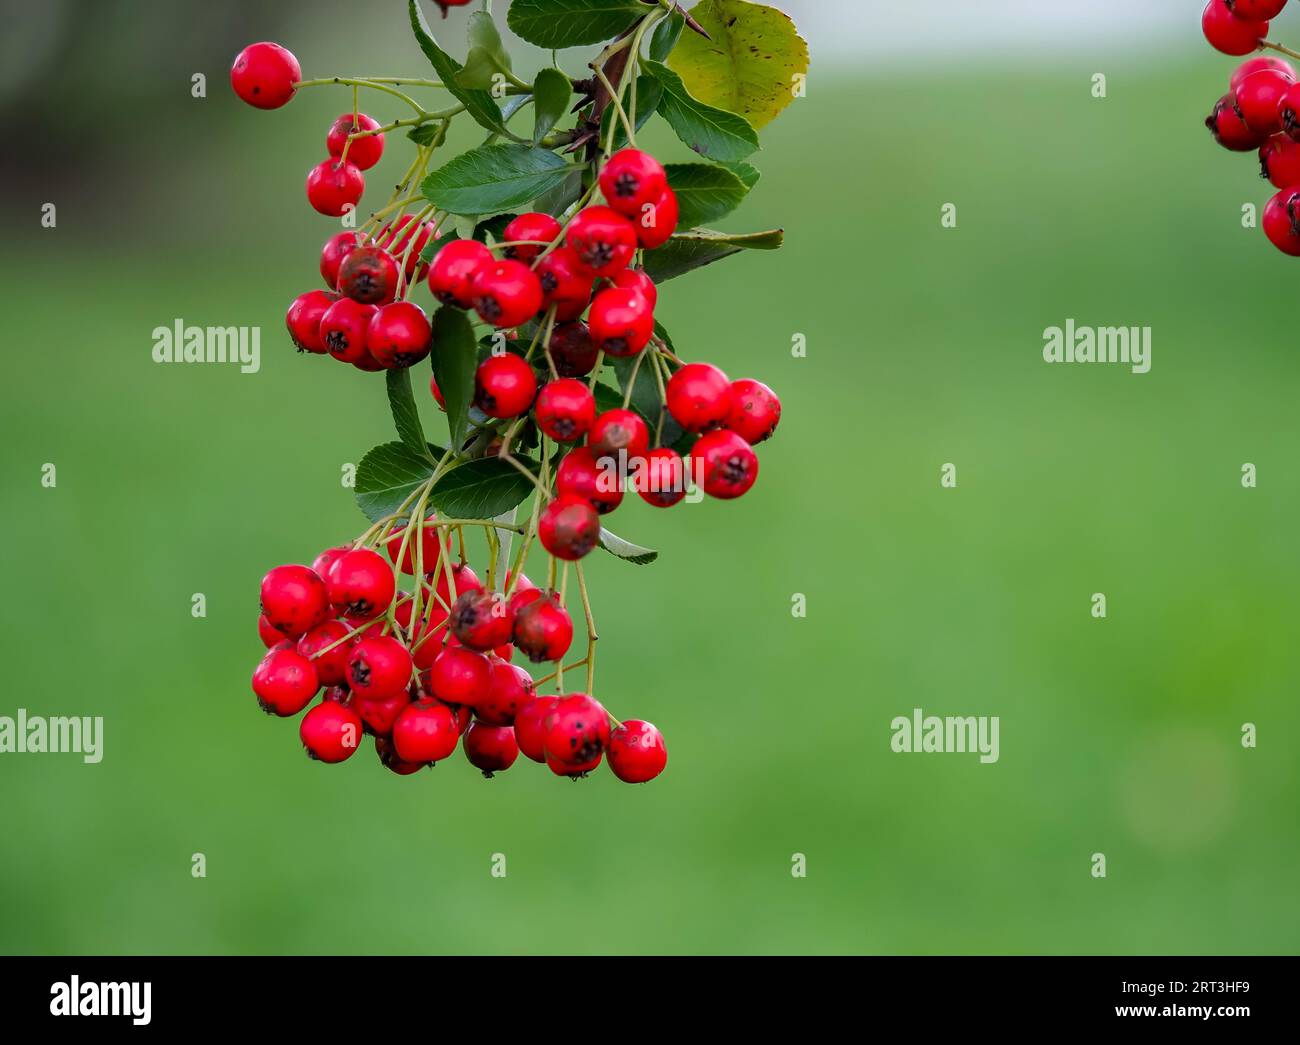 scarlet firefly,Pyracantha coccinea, a deciduous shrub of the Rosaceae family, a thorny evergreen with red ornamental fruits in a natural habitat on a Stock Photo